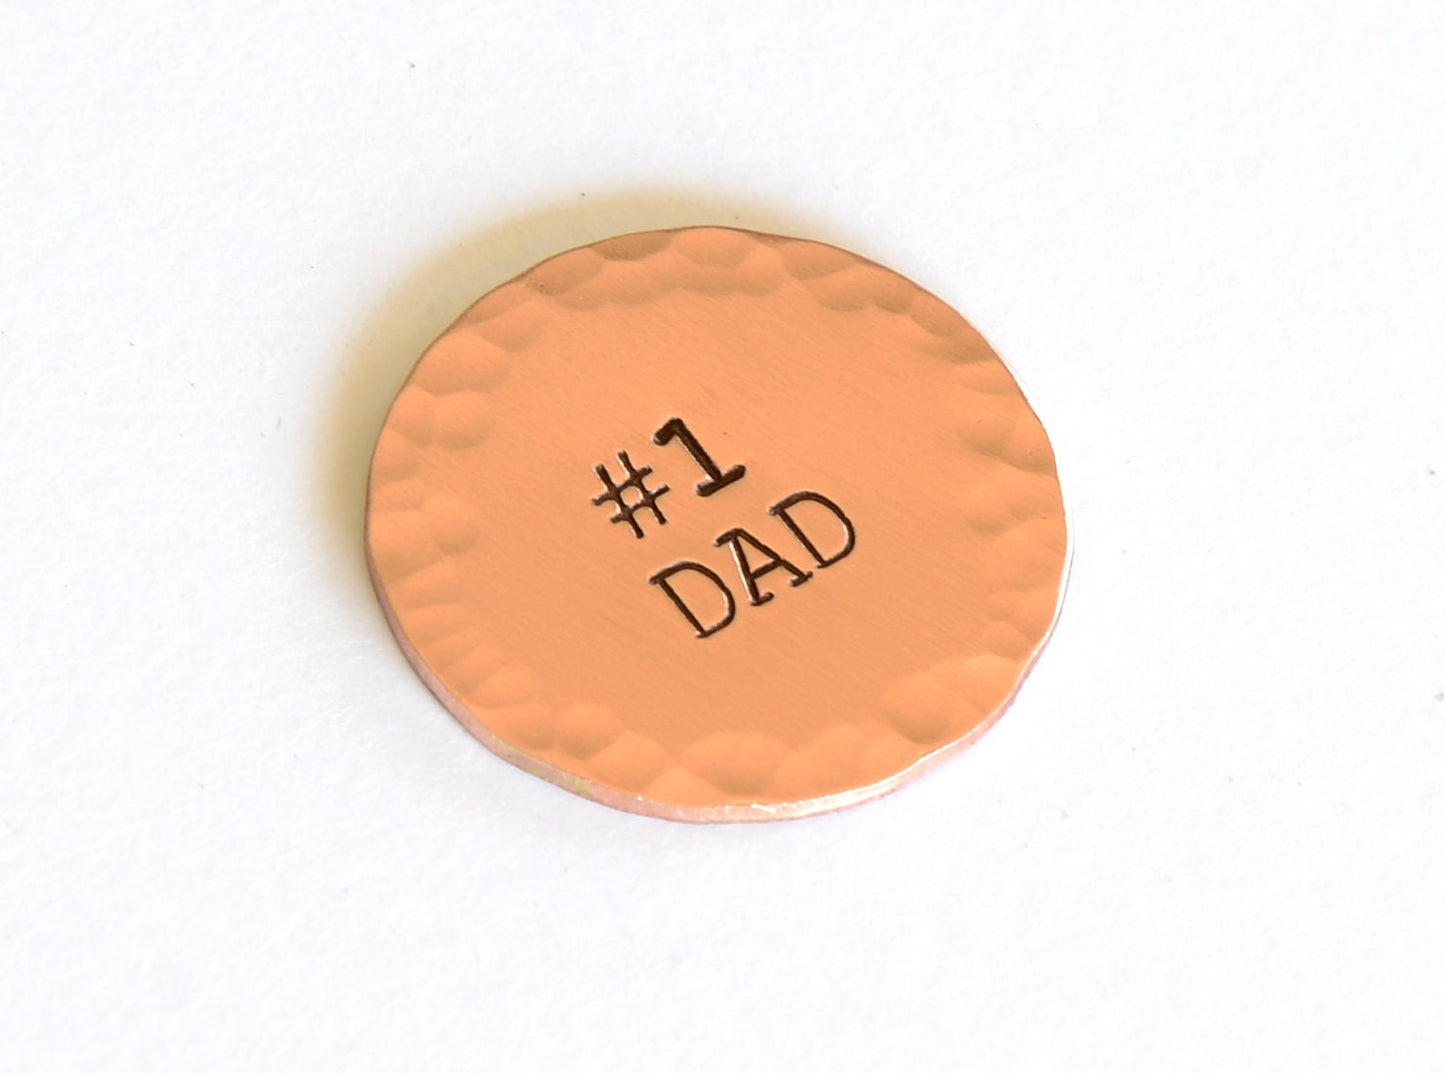 Copper Golf Ball Marker stamped with Number One Dad